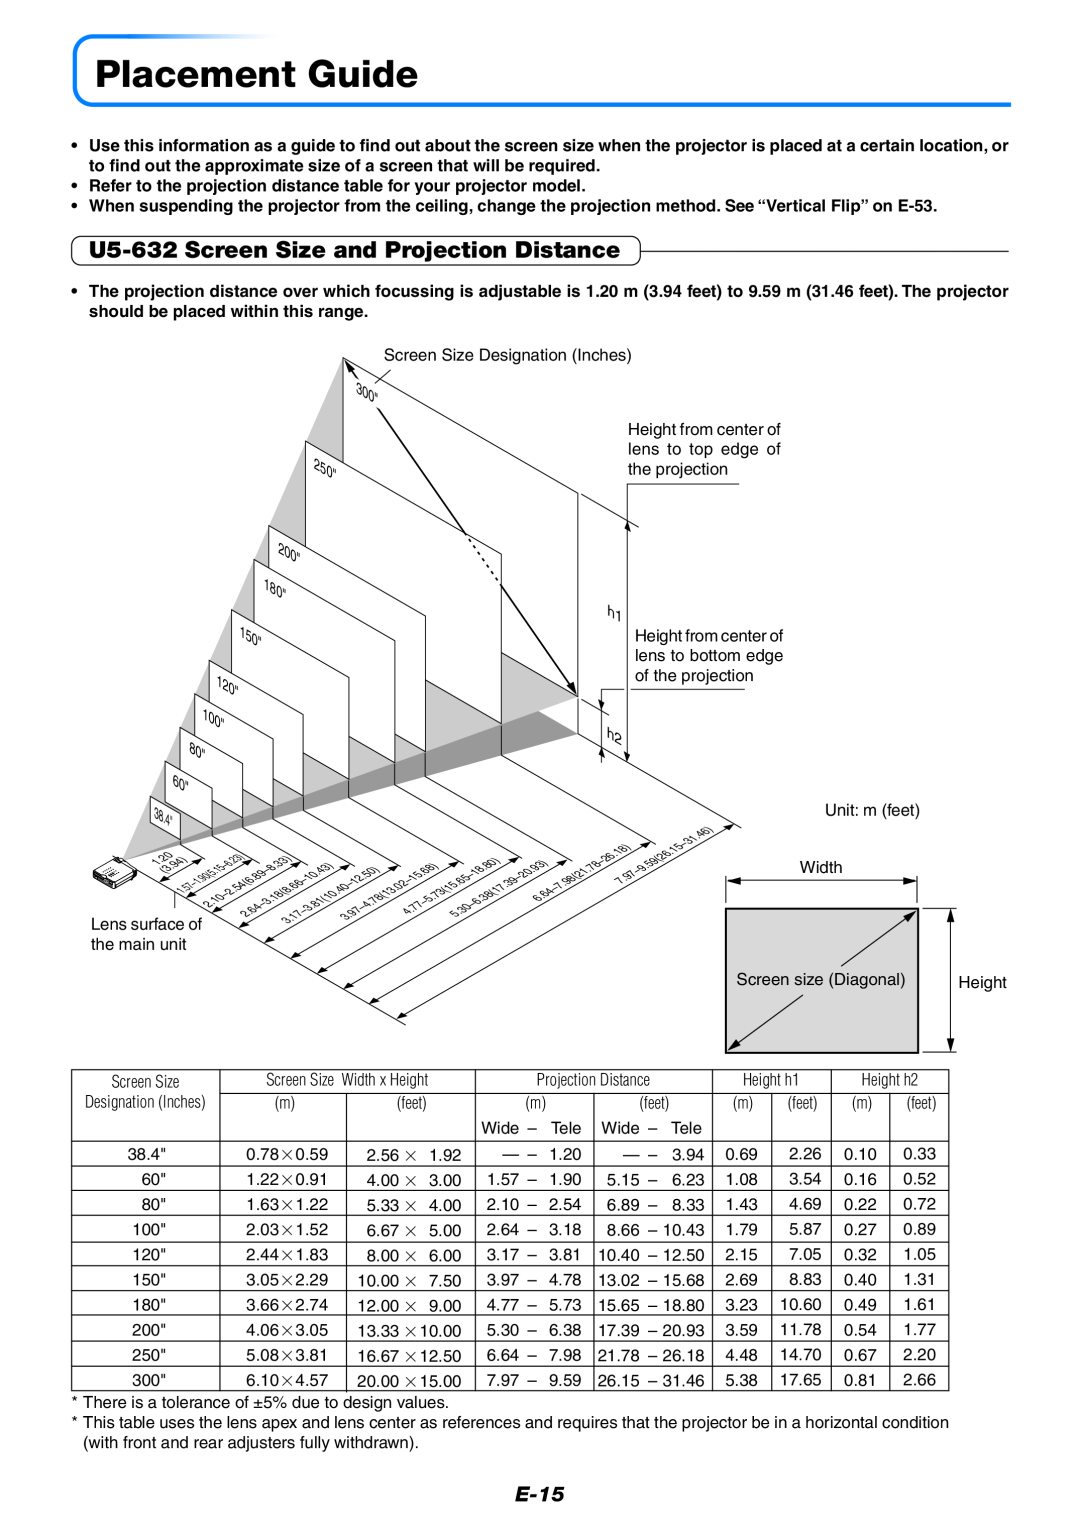 PLUS Vision U5-532, U5-512 user manual Placement Guide, U5-632 Screen Size and Projection Distance, 300 250, E-15 